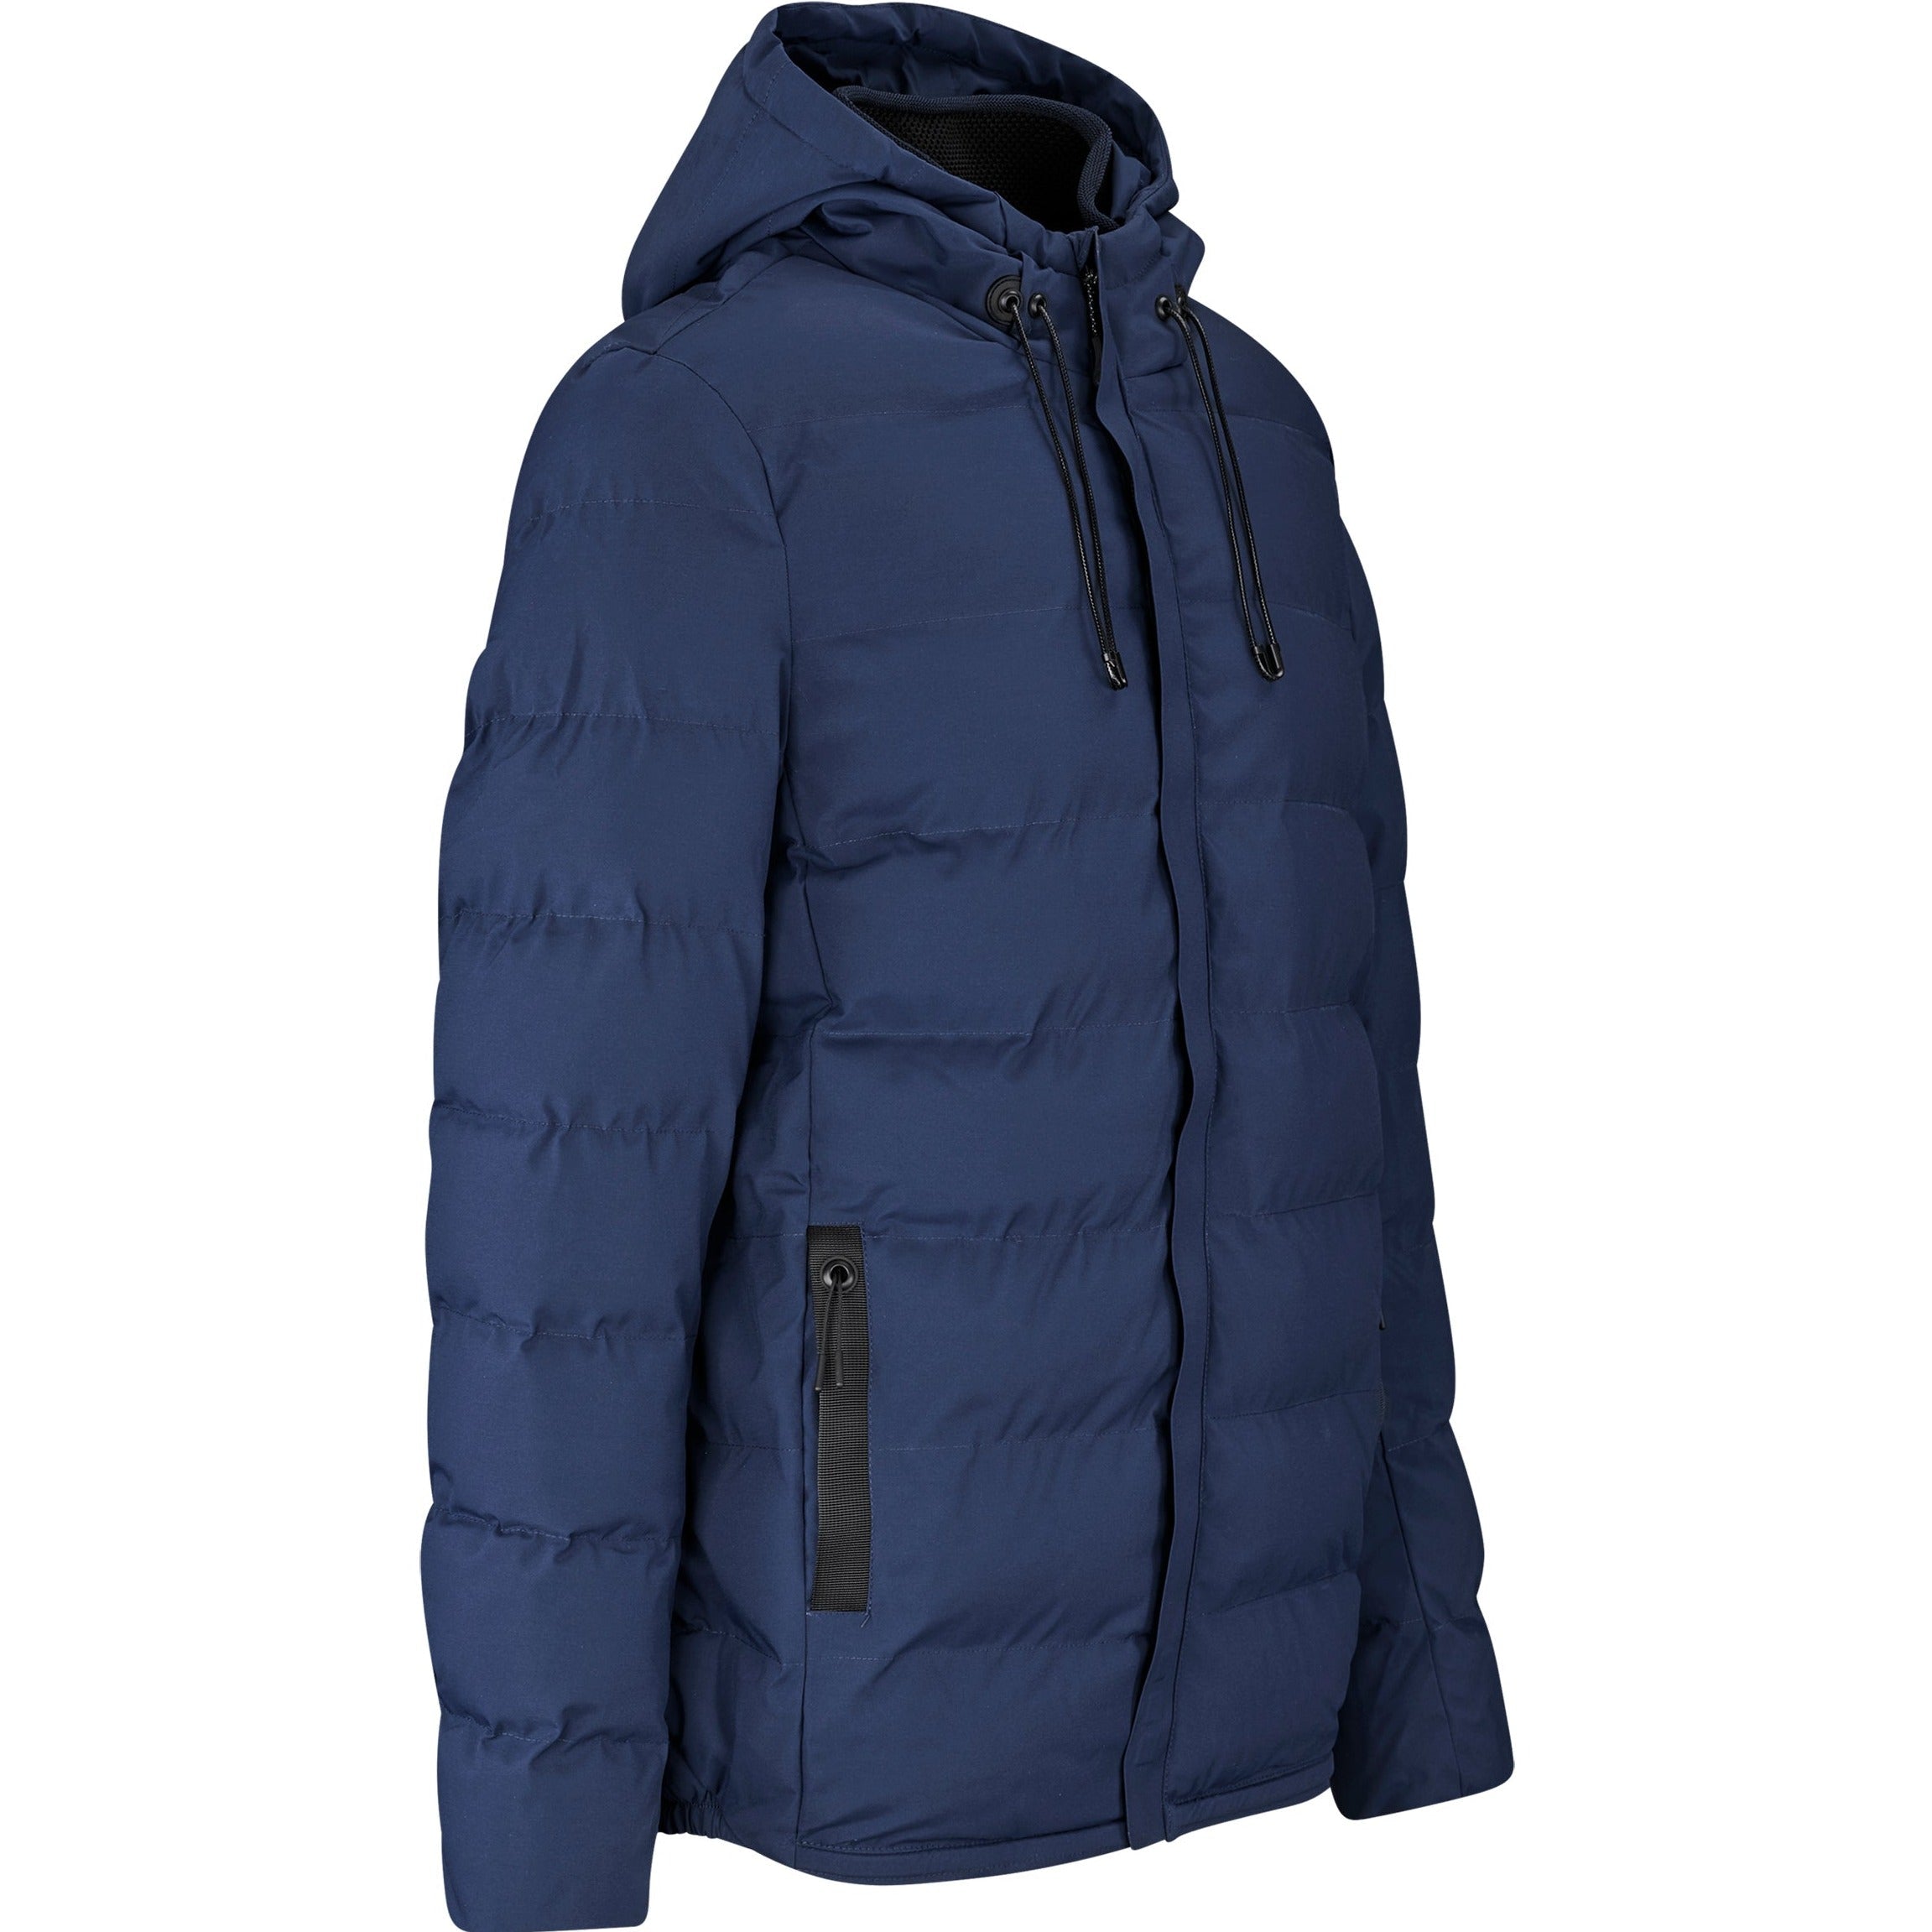 Side elevation of a blue mountain jacket on a white background